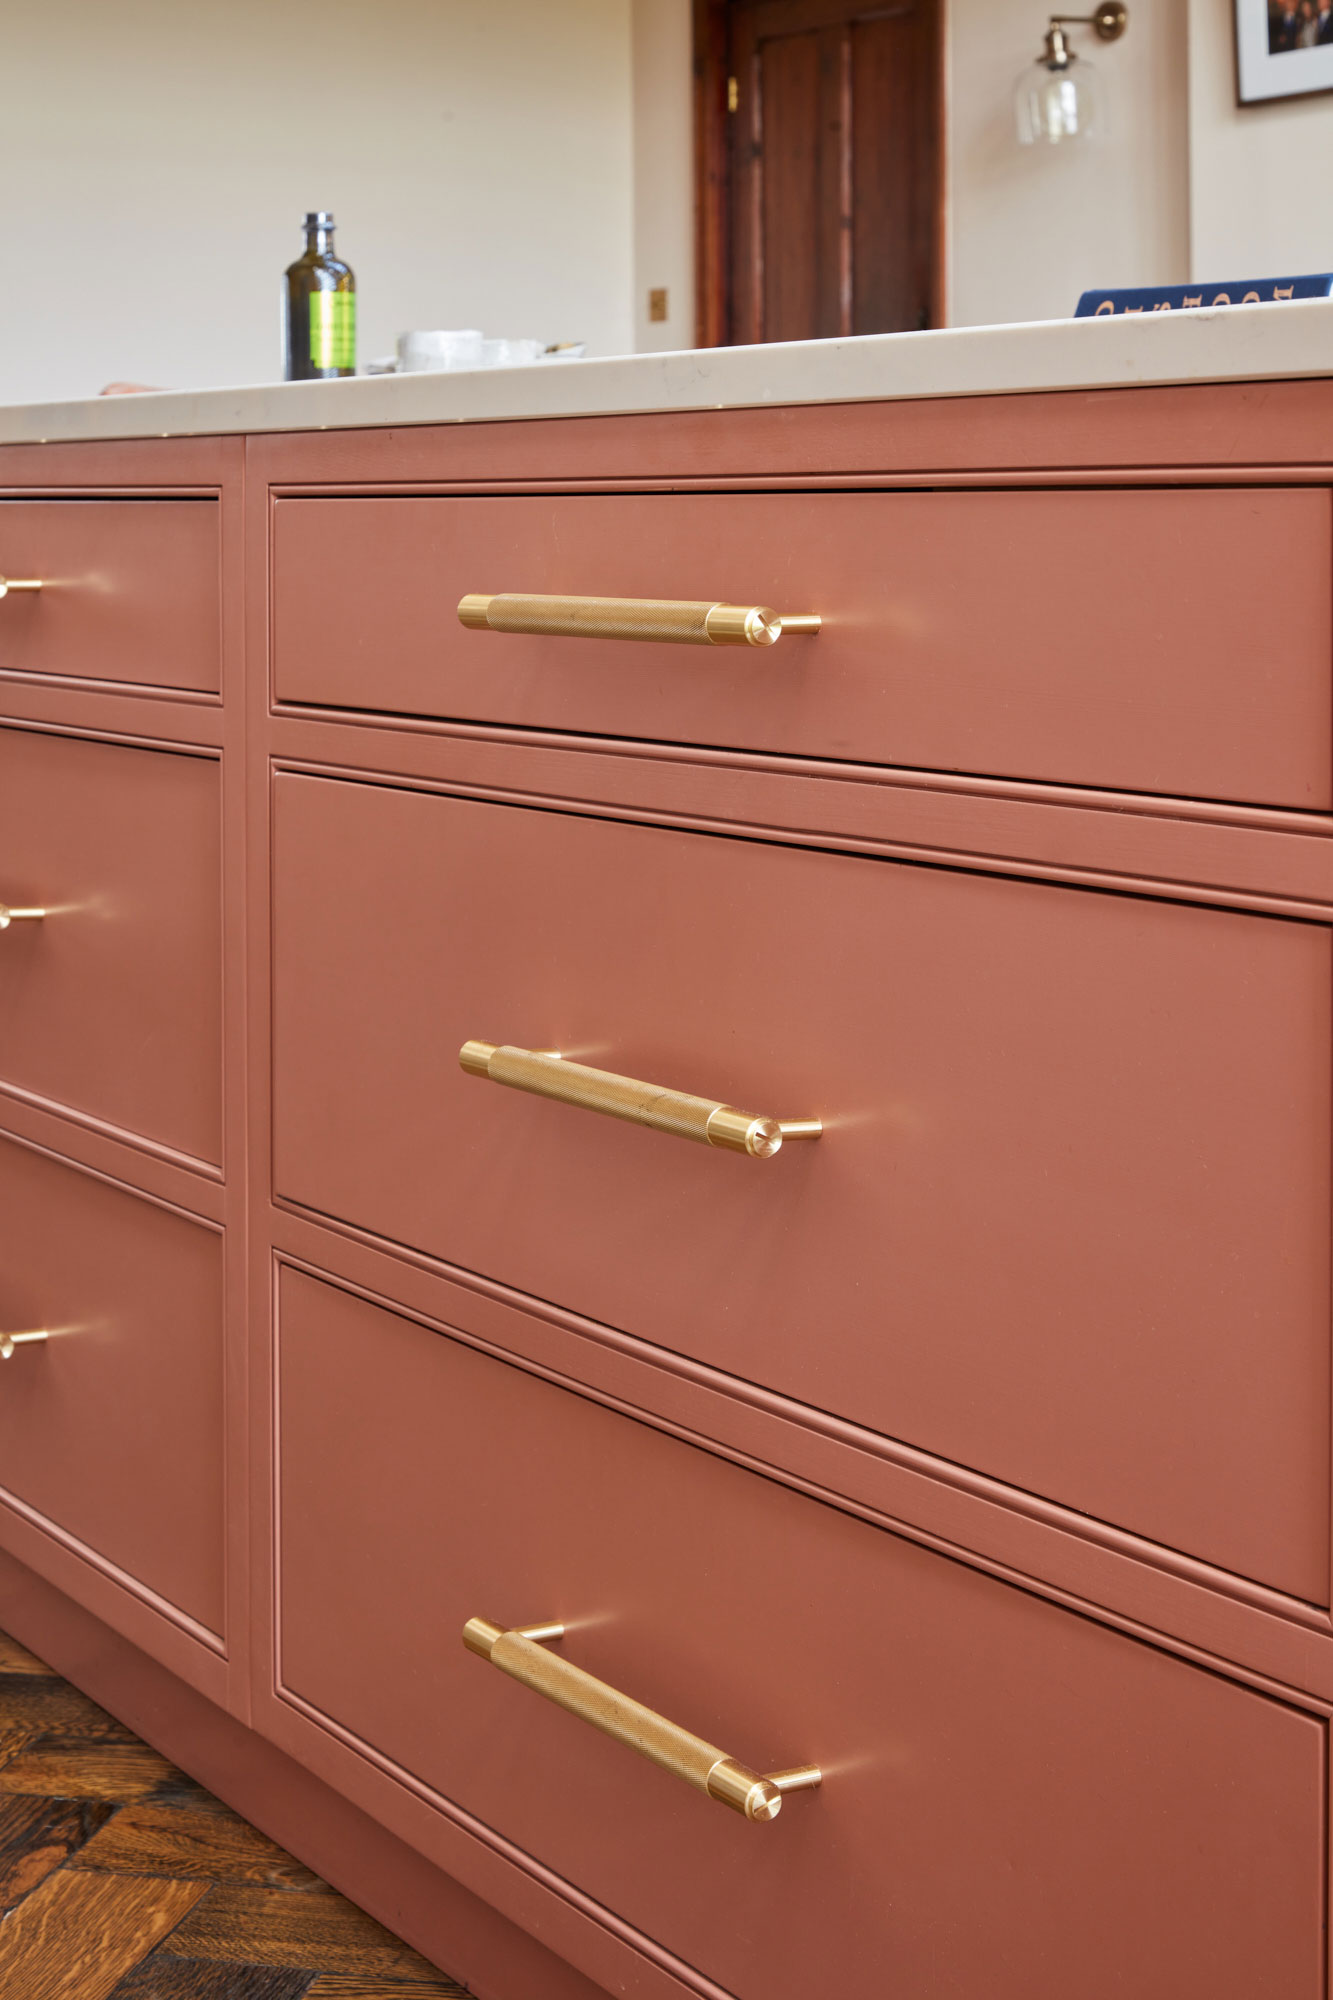 Buster & Punch heavy brass kitchen handles on pink drawers